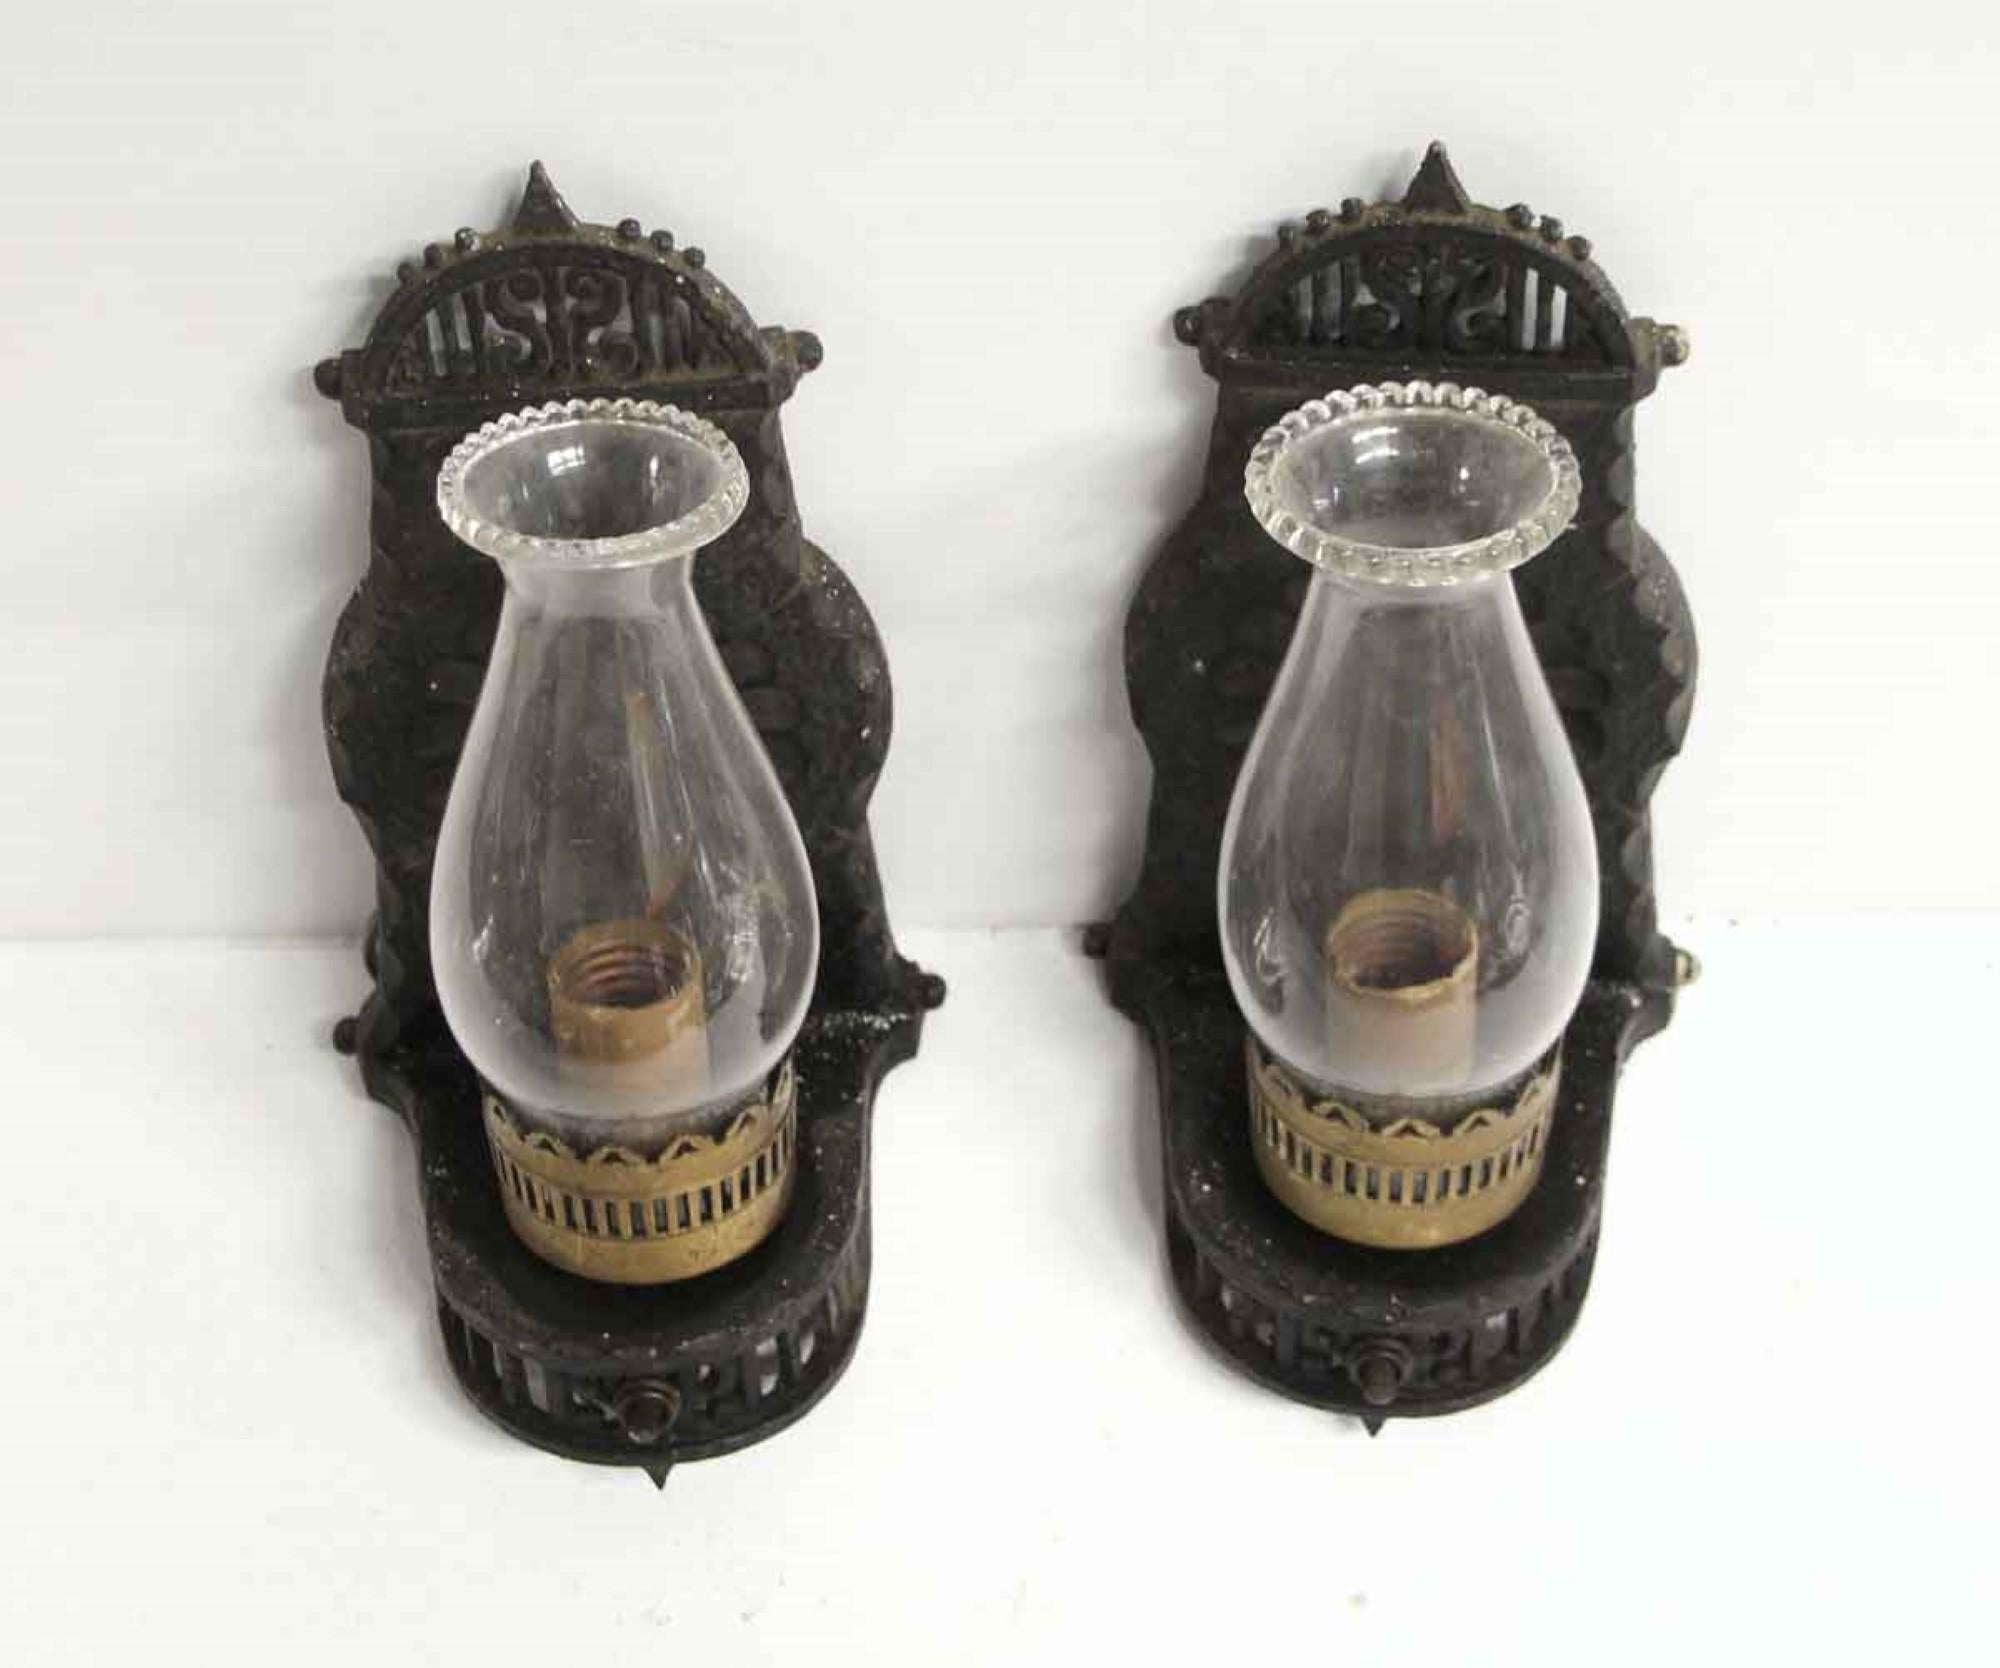 1910s pair of cast iron wall sconces with clear glass chimney shades. Done in an Arts & Crafts style.